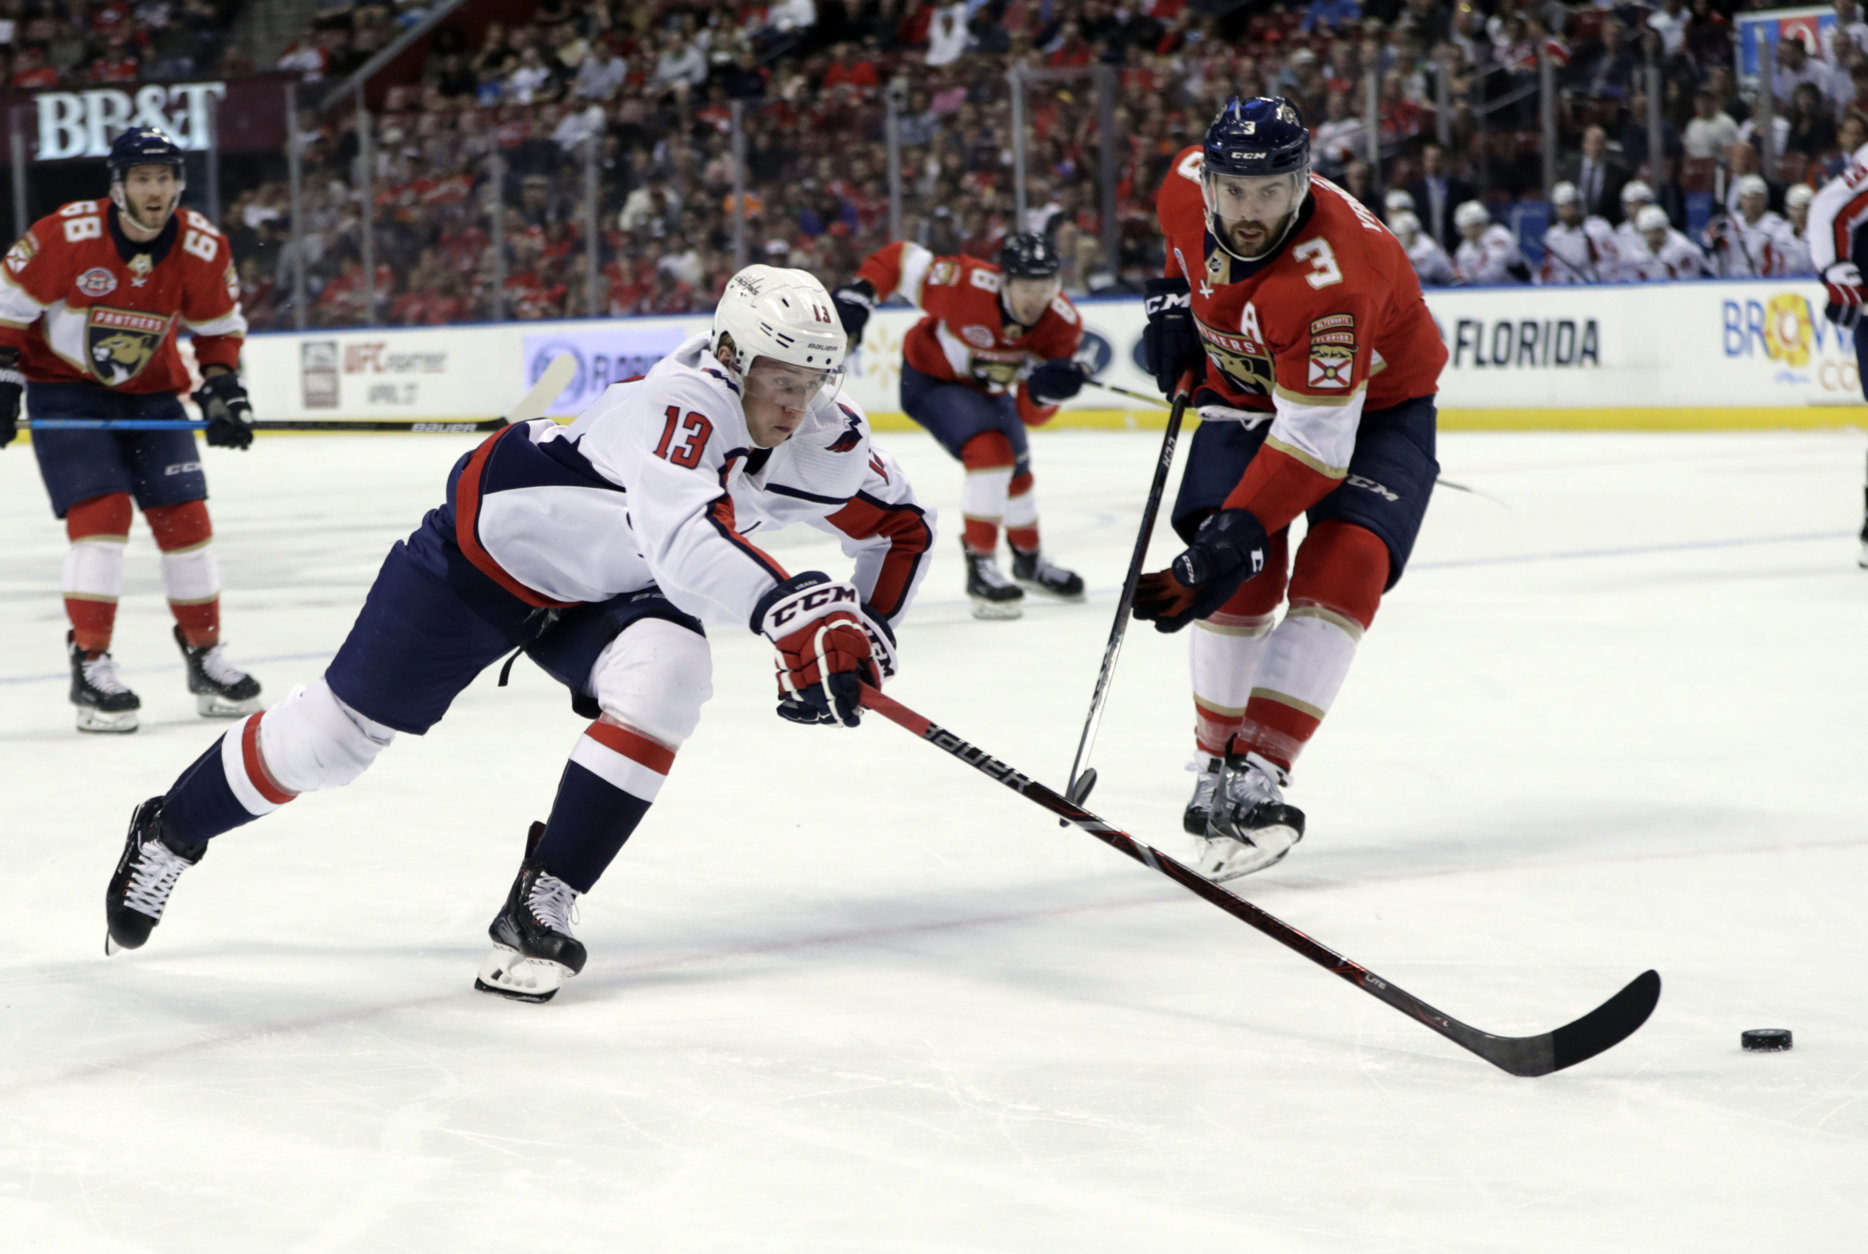 Washington Capitals left wing Jakub Vrana (13) skates with the puck as Florida Panthers defenseman Keith Yandle (3) pursues during the first period of an NHL hockey game, Monday, April 1, 2019, in Sunrise, Fla. (AP Photo/Lynne Sladky)